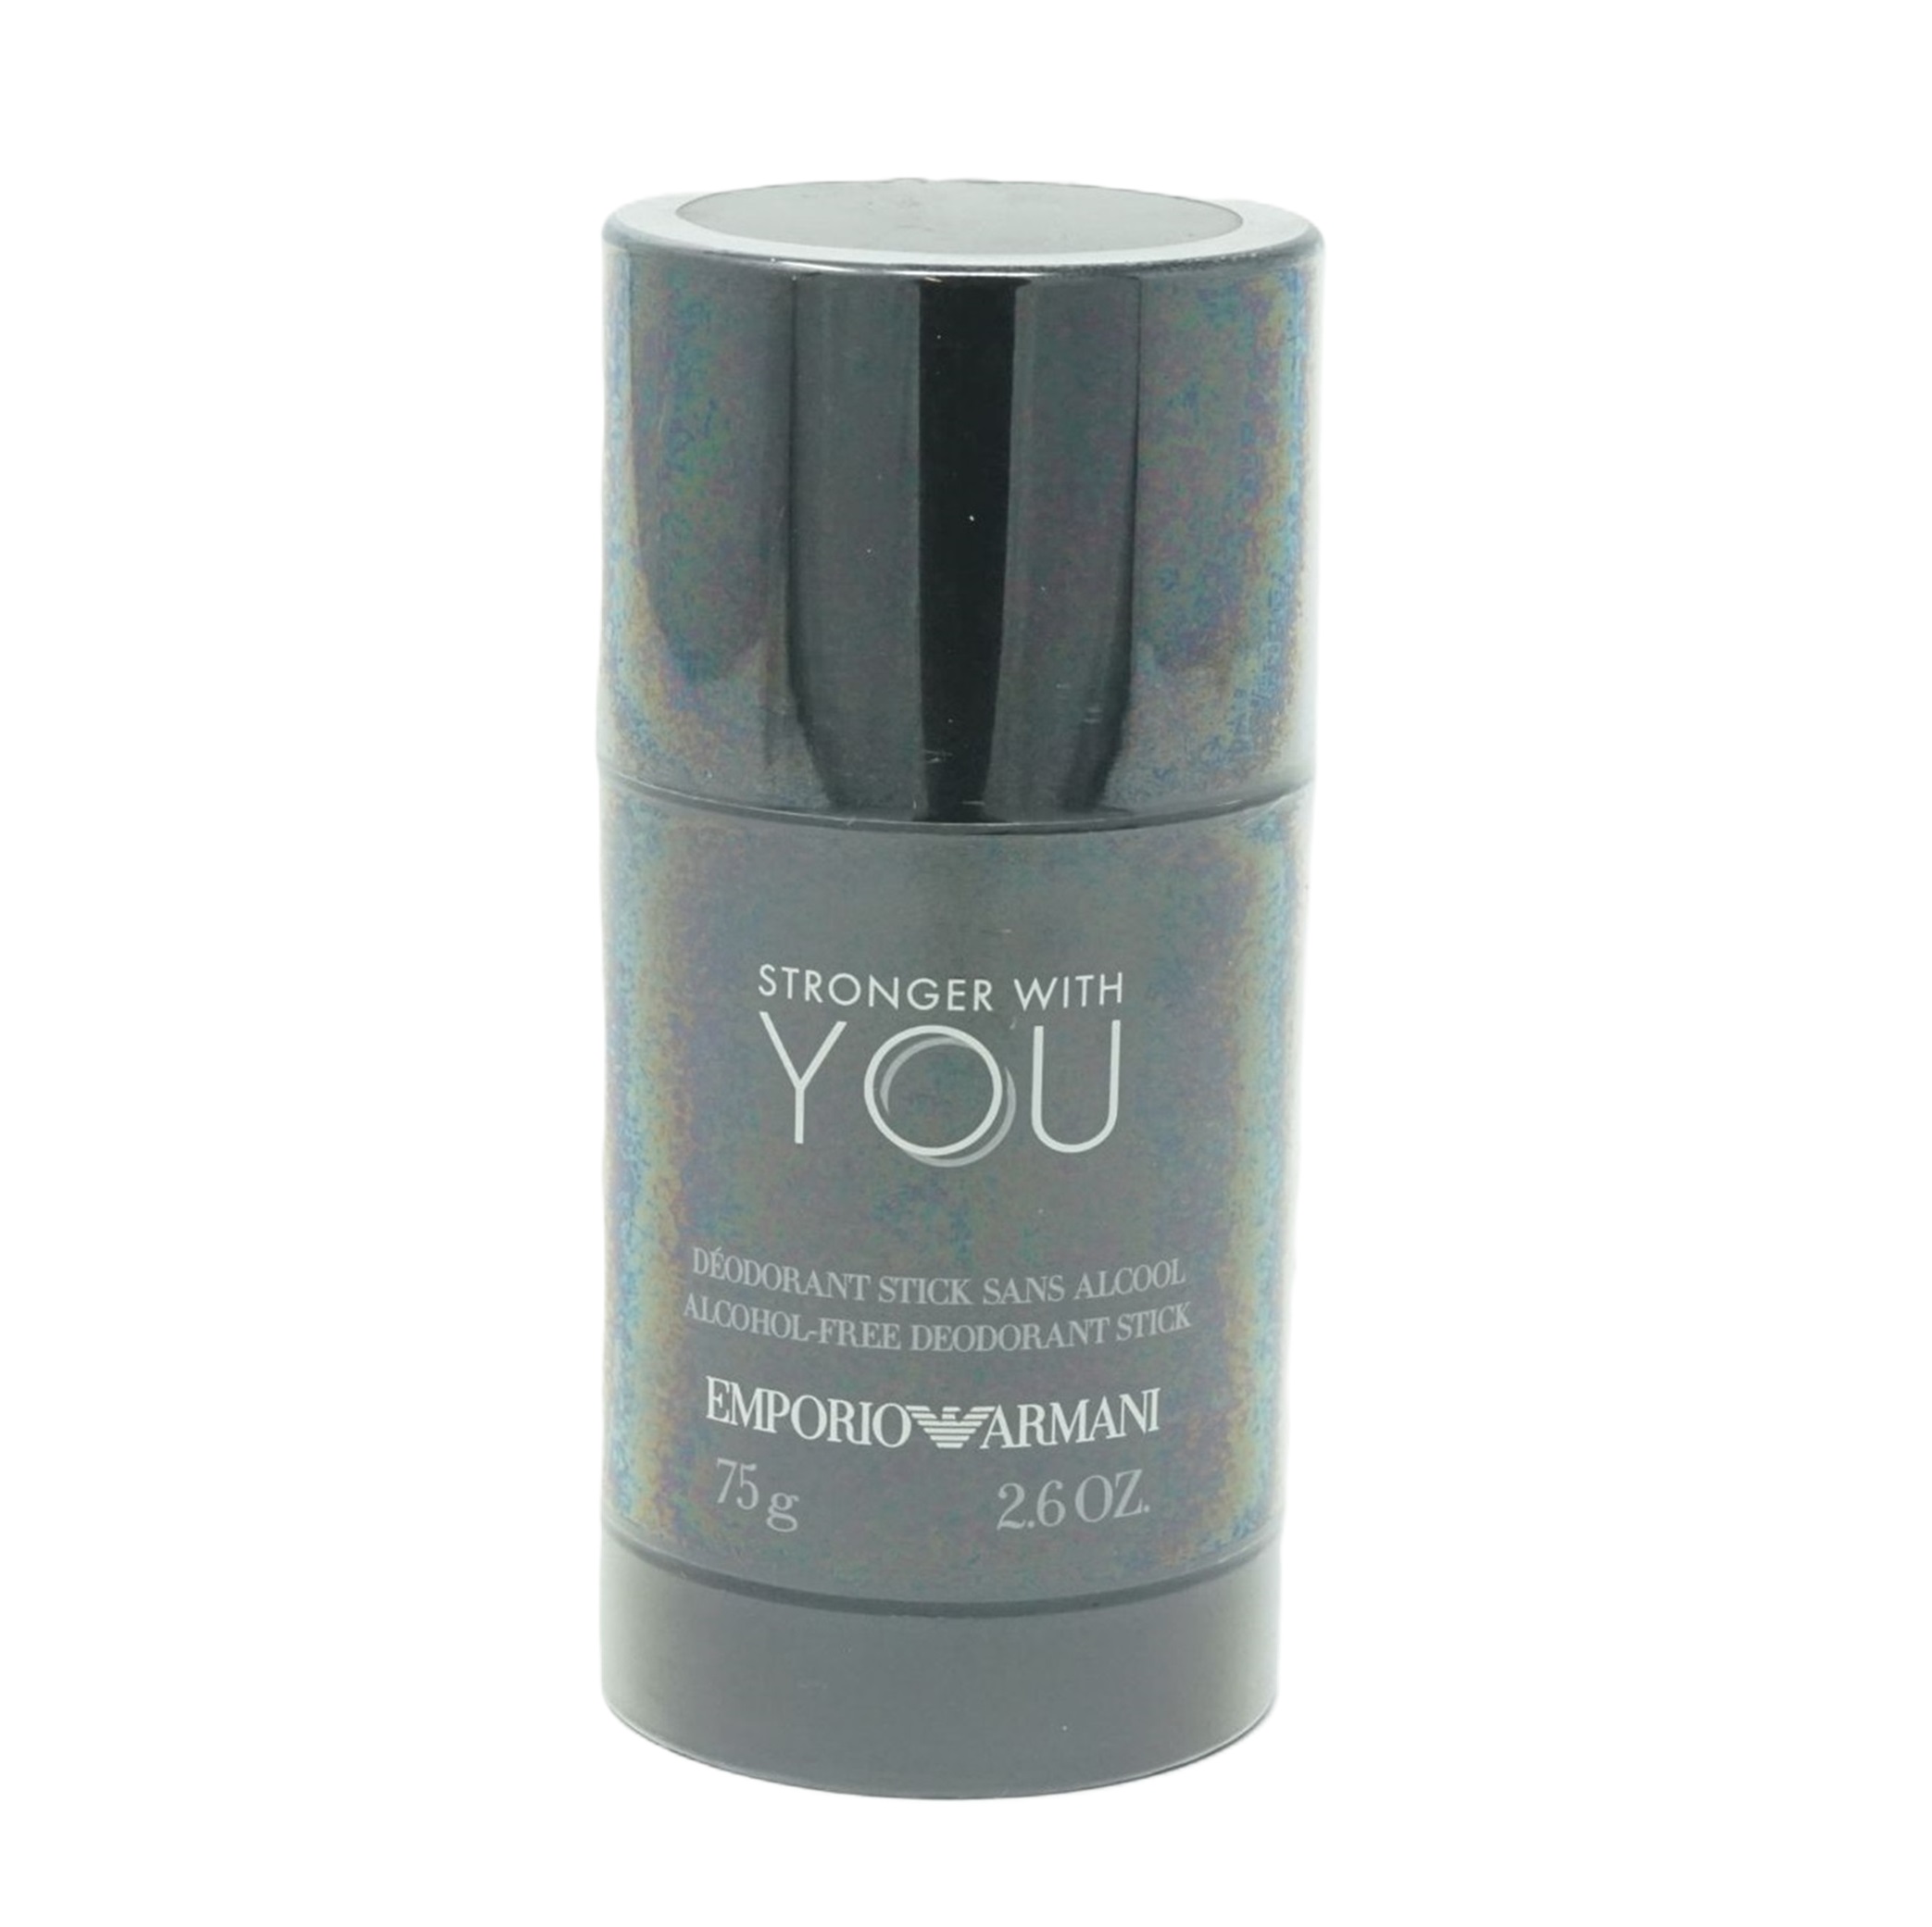 Armani Stronger with you Deodorant Stick 75g